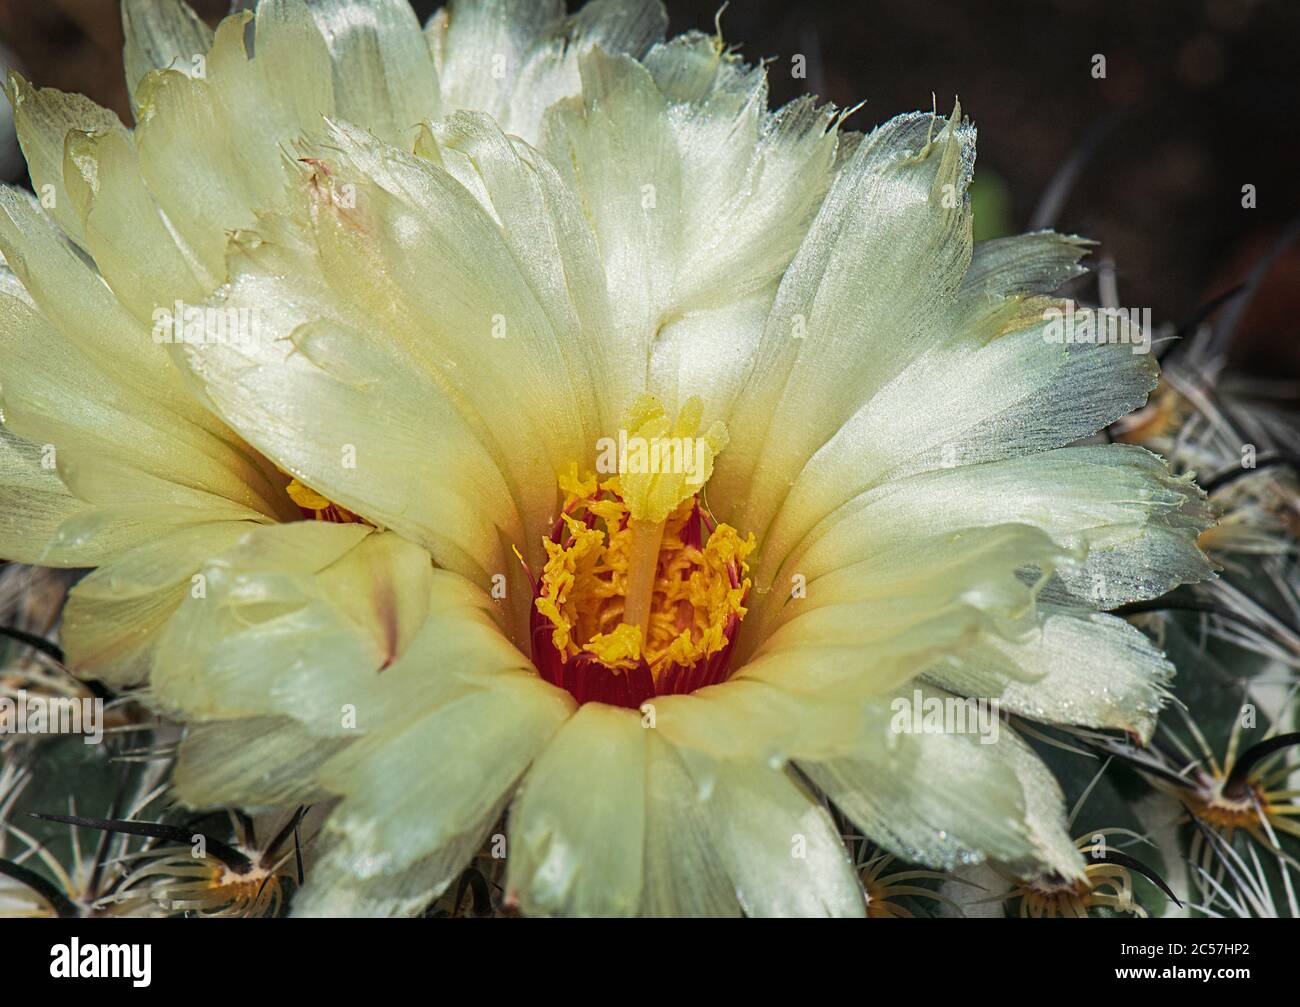 Closeup Macro of a Yellow Rhinoceros Sea-urchin Coryphantha cornifera Cactus Flower showing fine detail of the petals, stamens, pistil, pollen and spi Stock Photo